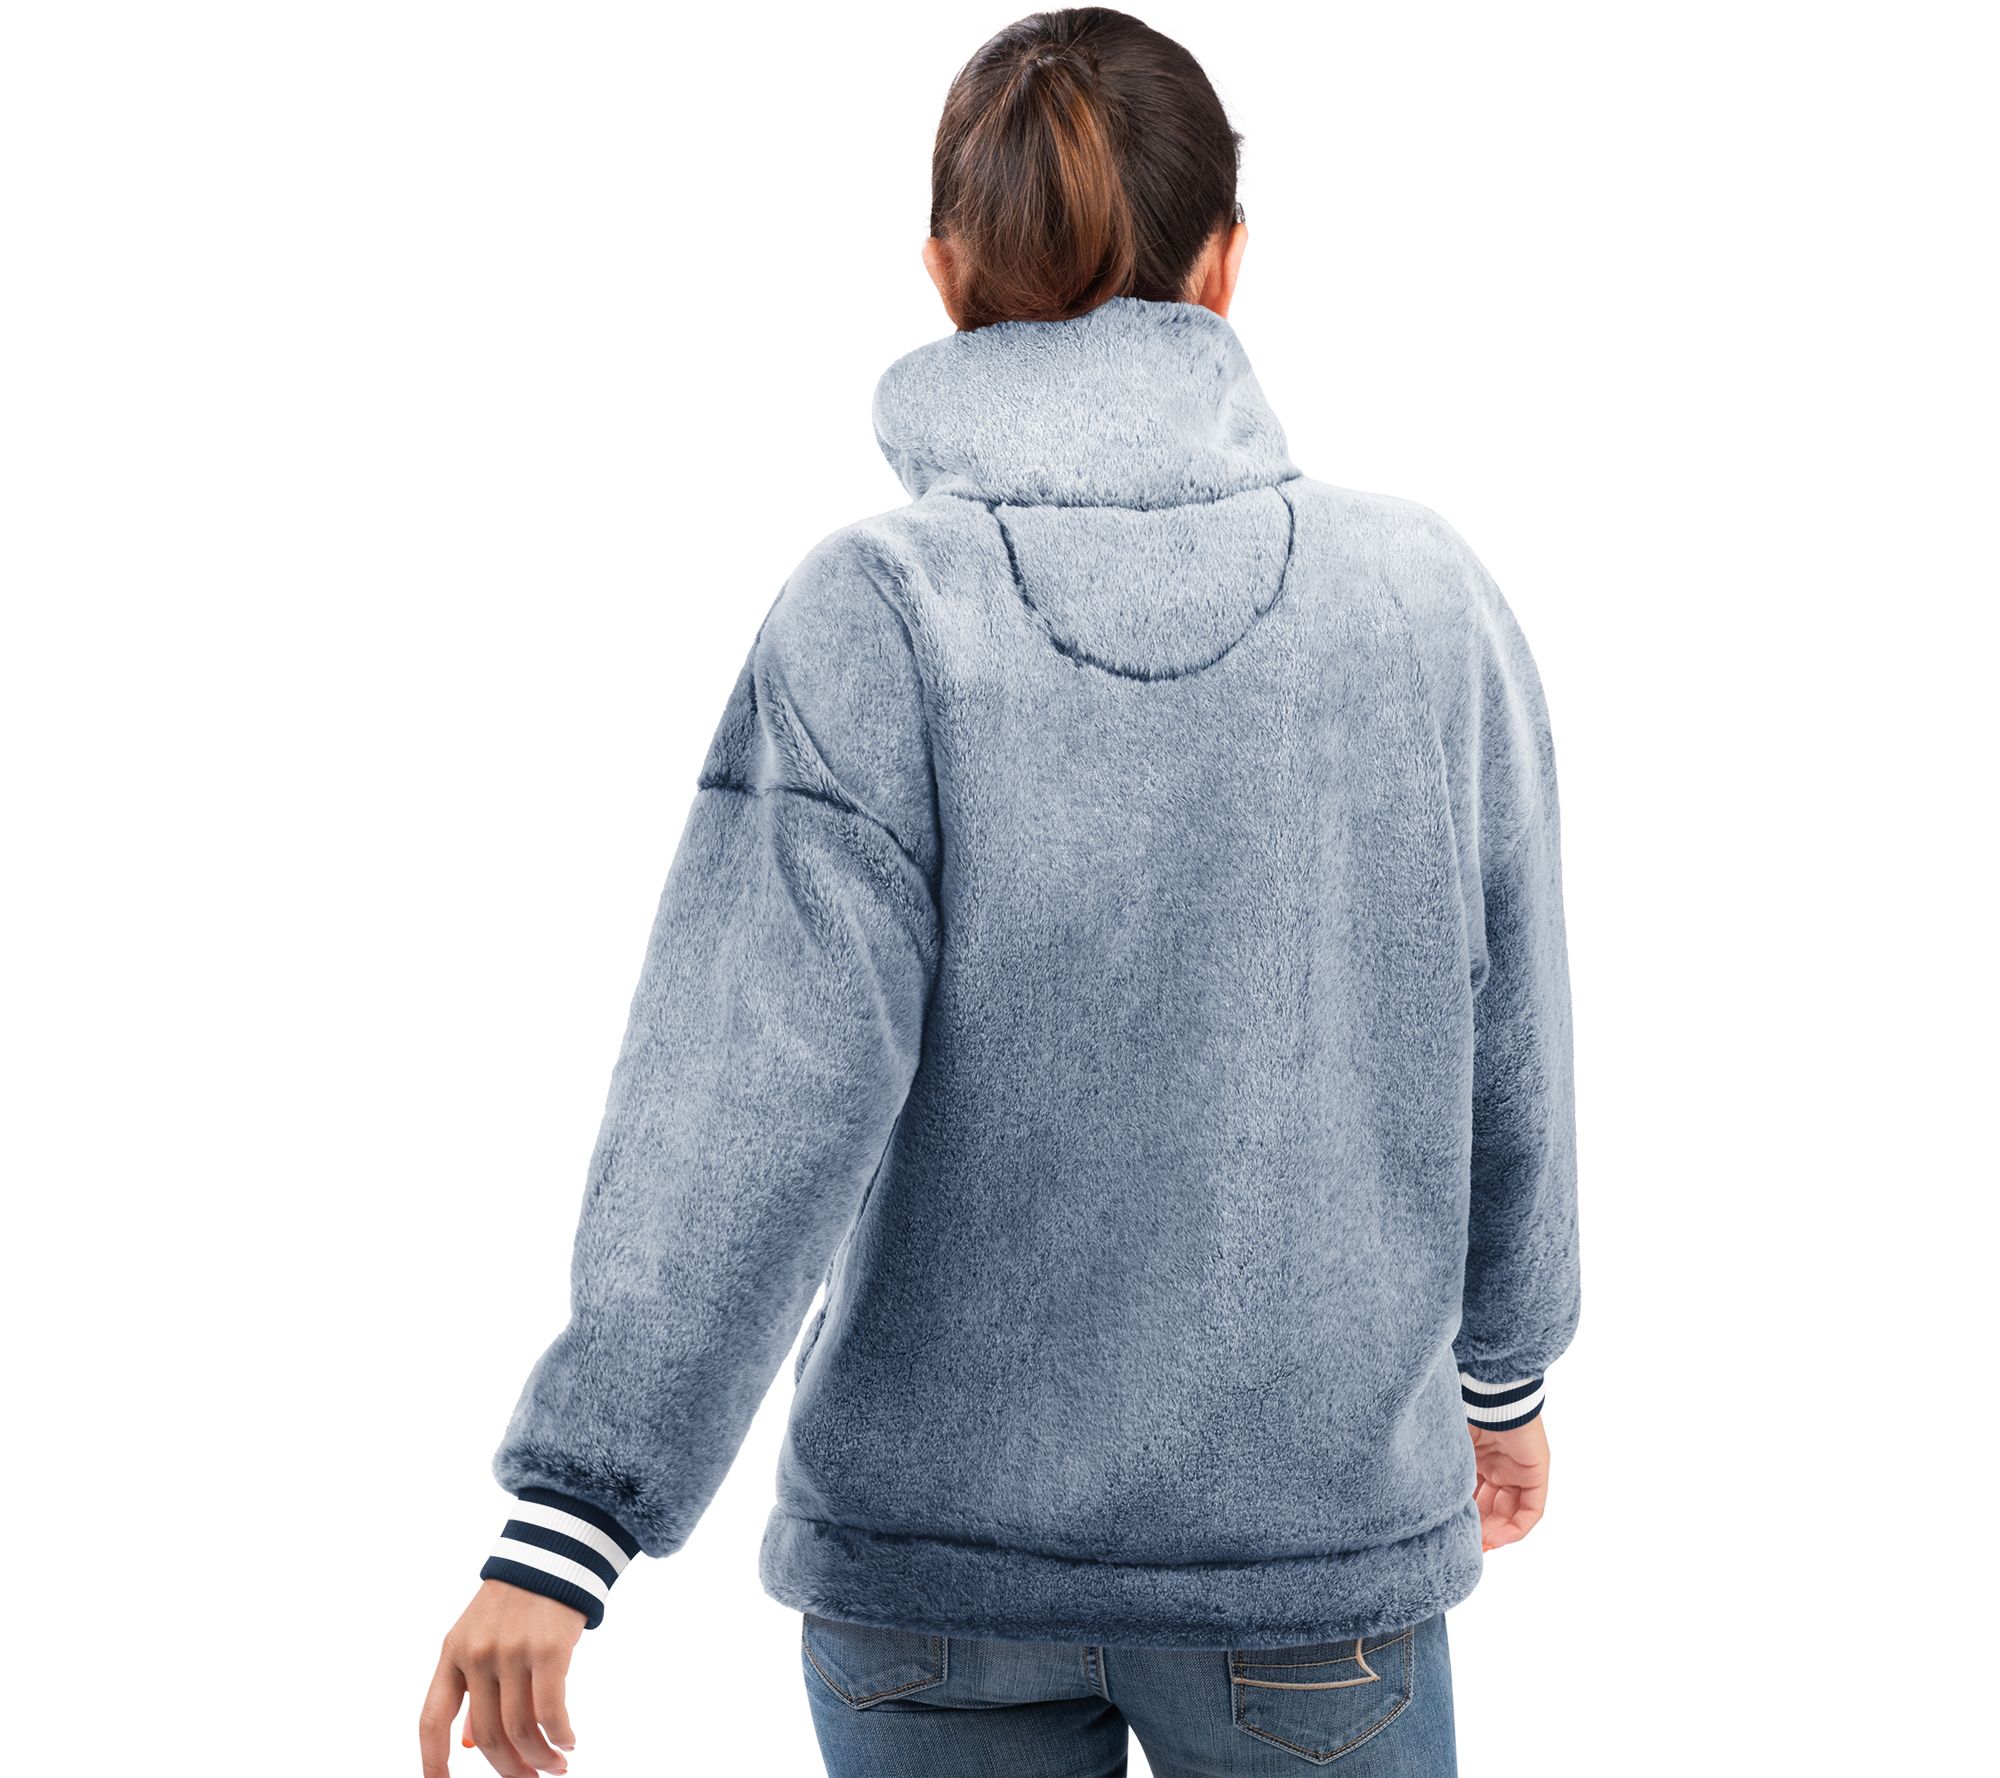 NFL Dallas_Women's Frosted Sherpa Pullover w/ Rib Knit Sleeves - QVC.com